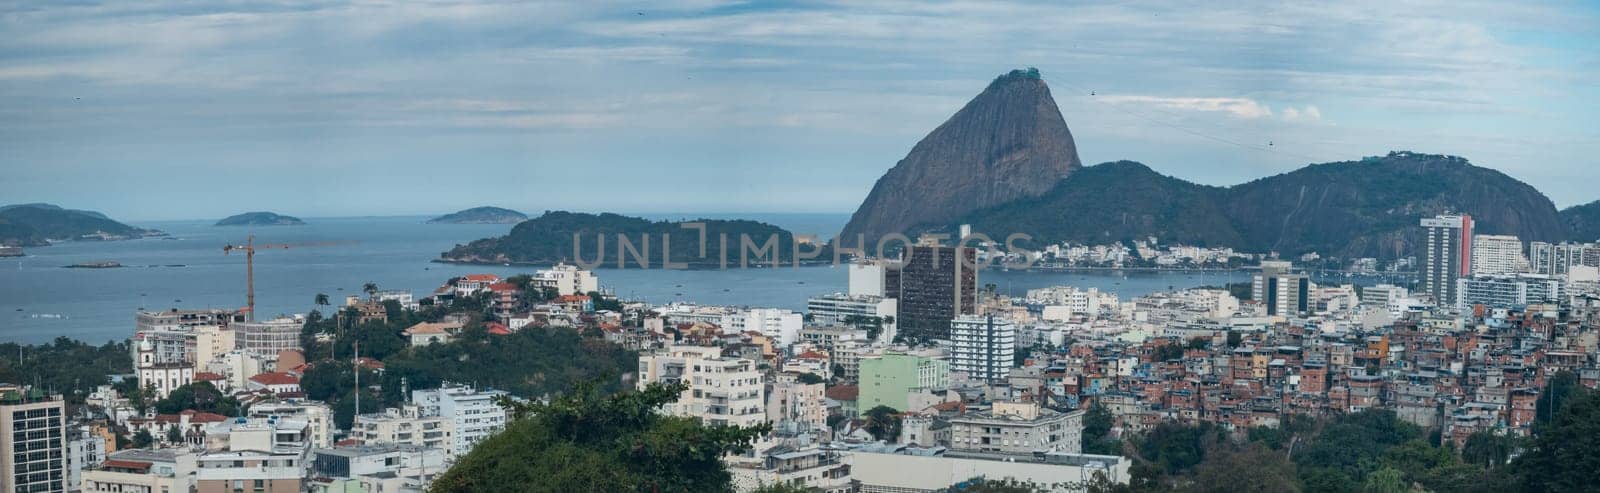 Enjoying a breathtaking view of Rio de Janeiro bay from Botafogo, surrounded by the majestic Sugarloaf mountain and city buildings on the waterfront.